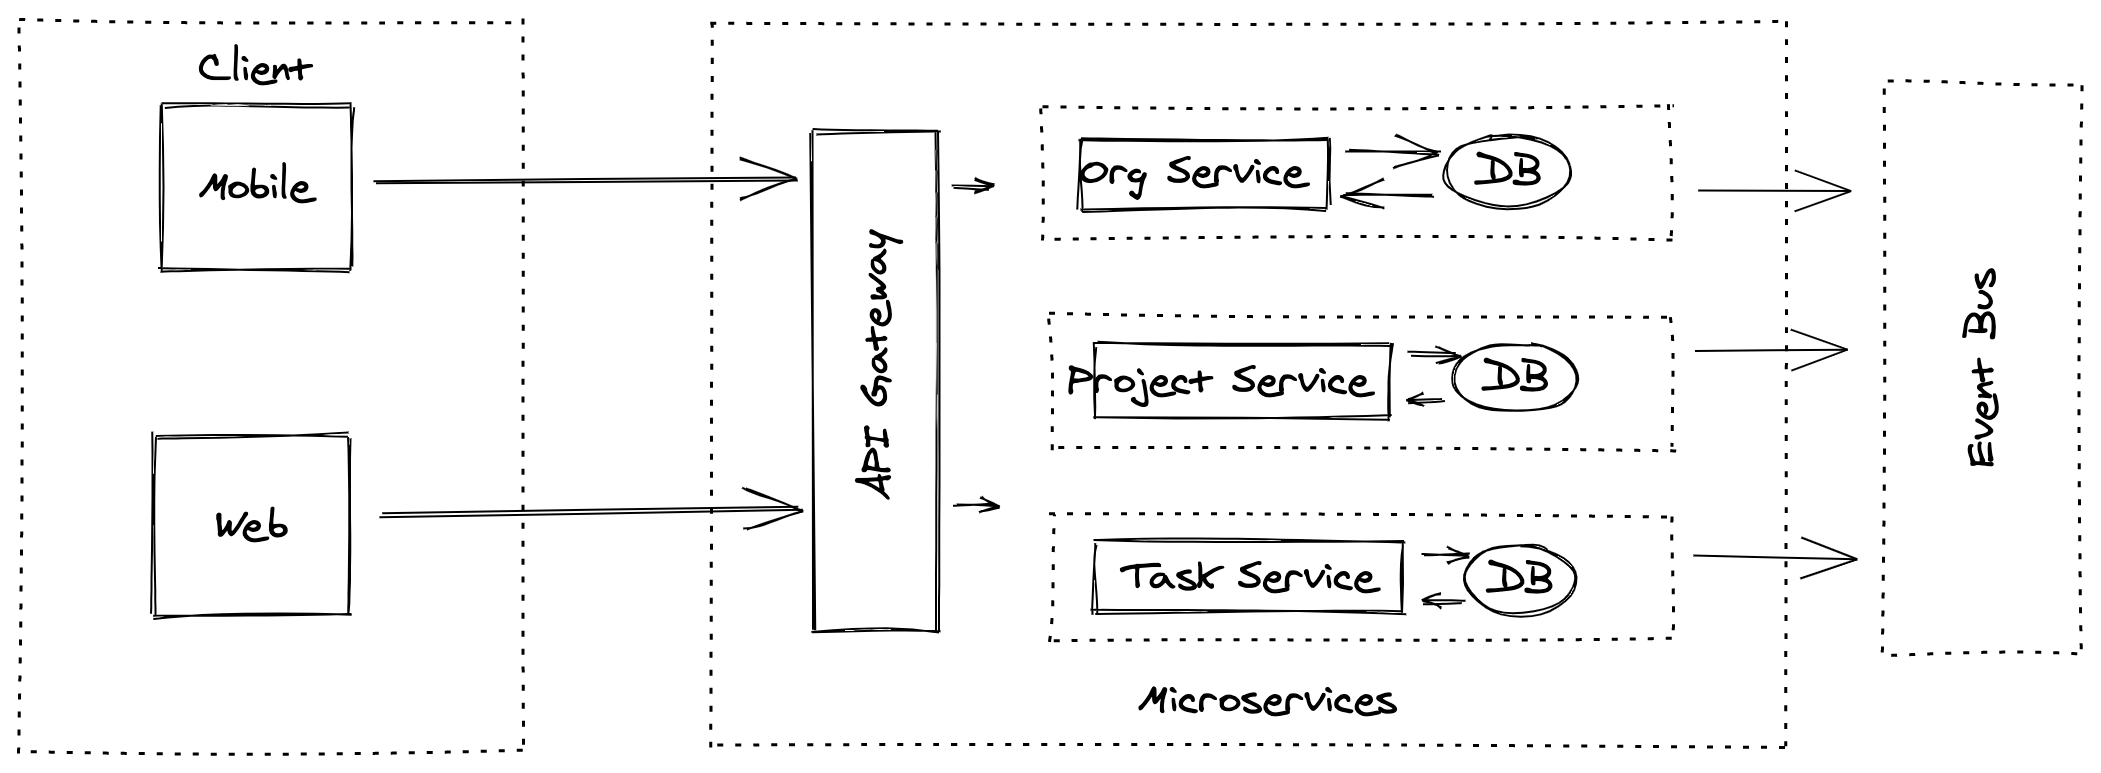 Microservices Architecture style